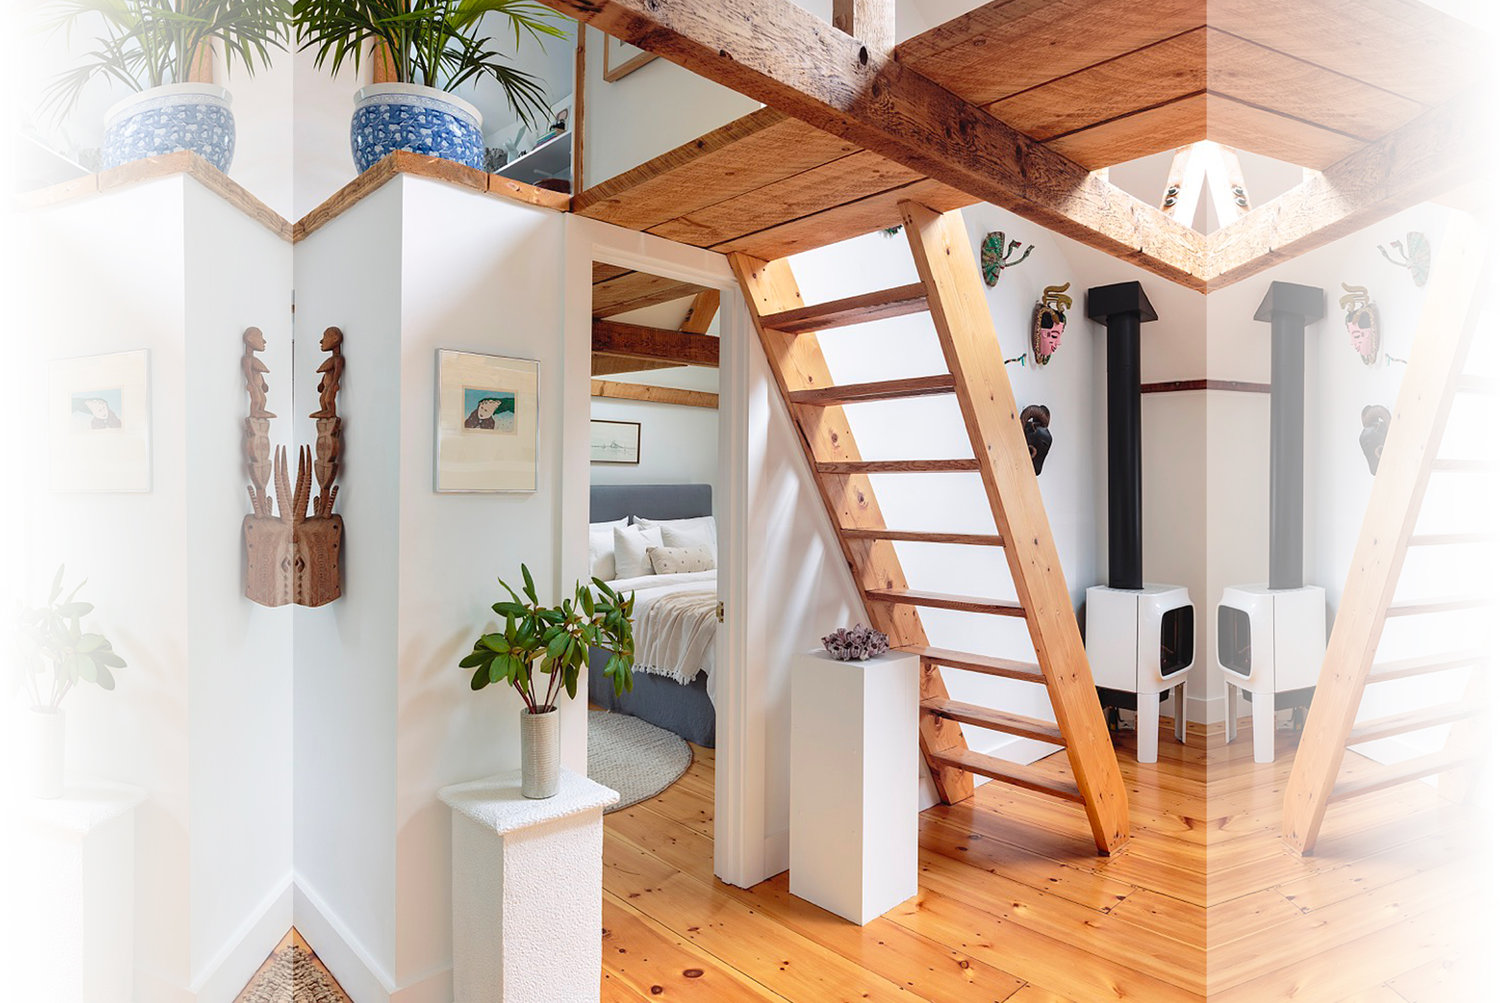 A pair of pedestals signals the entrance to the master bedroom. The ladder-like stairs lead to two small rooms,
one Andrea’s office, the other Bernadette’s studio. A 15-foot plank bridge links the two spaces, making the trek from one to the other a bit daunting for the uninitiated.